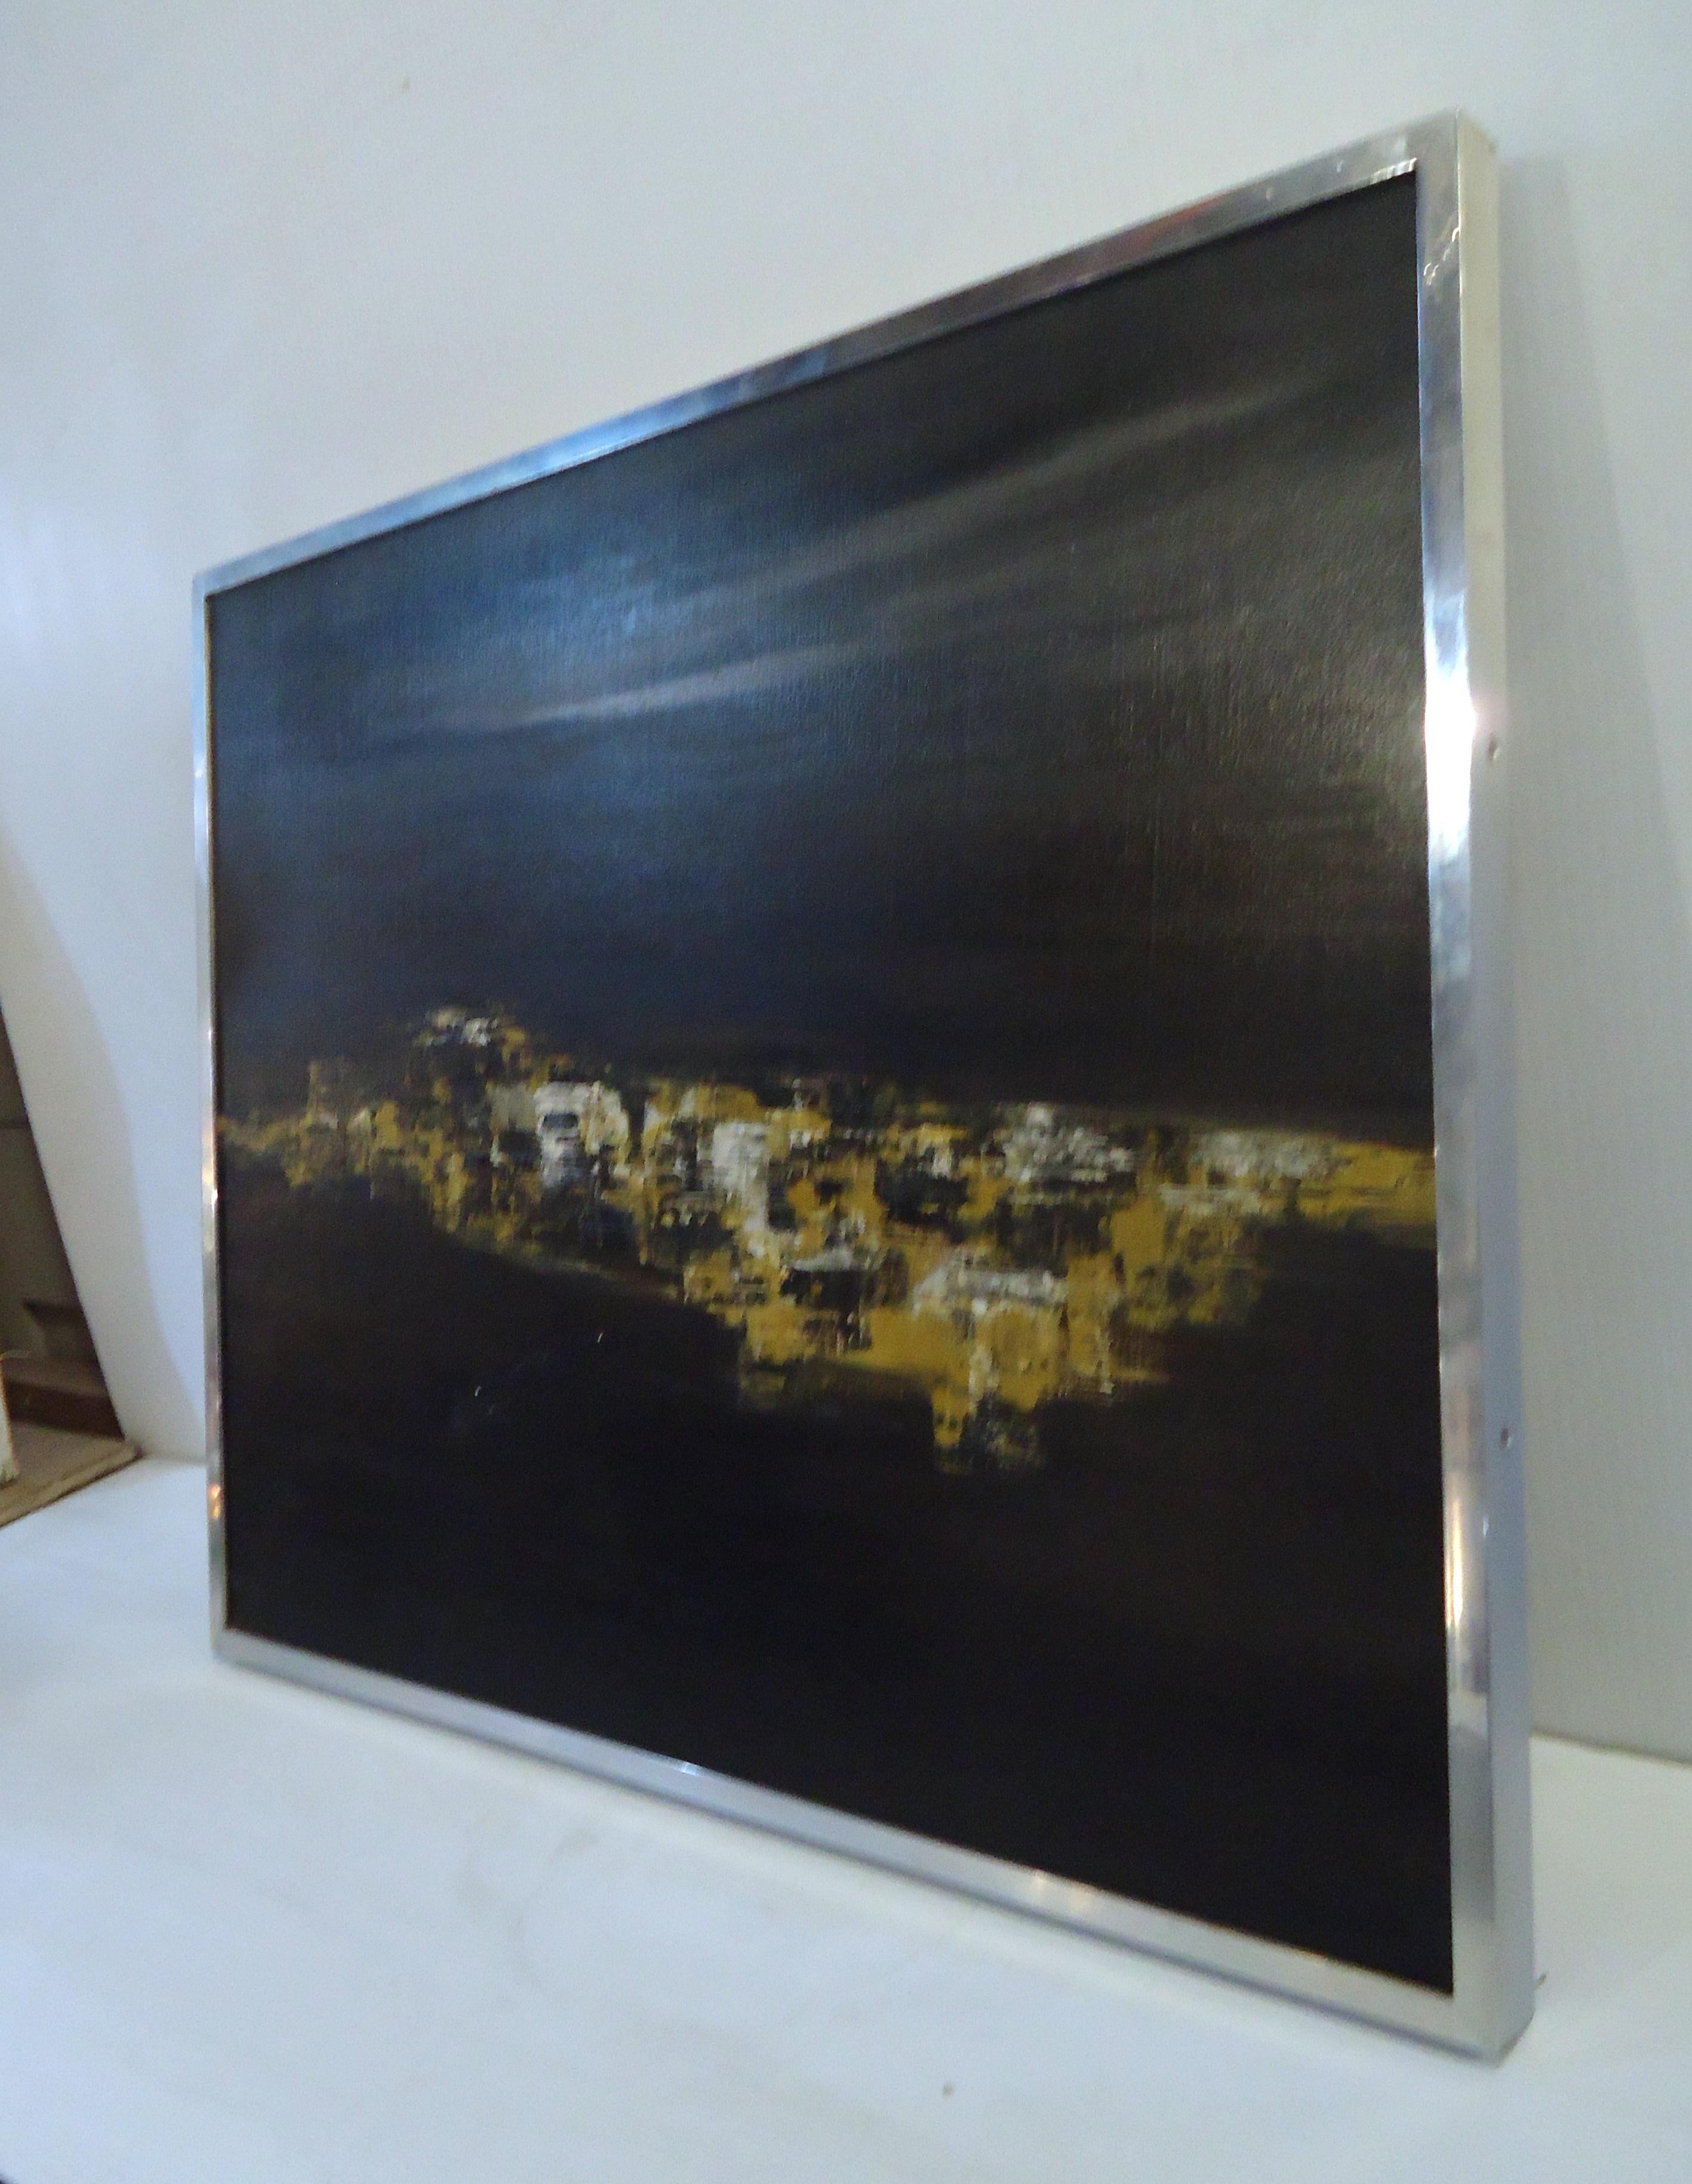 Stunning abstract painting signed by Fabio Sinisca featured in a metal frame.

Please confirm item location (NY or NJ).